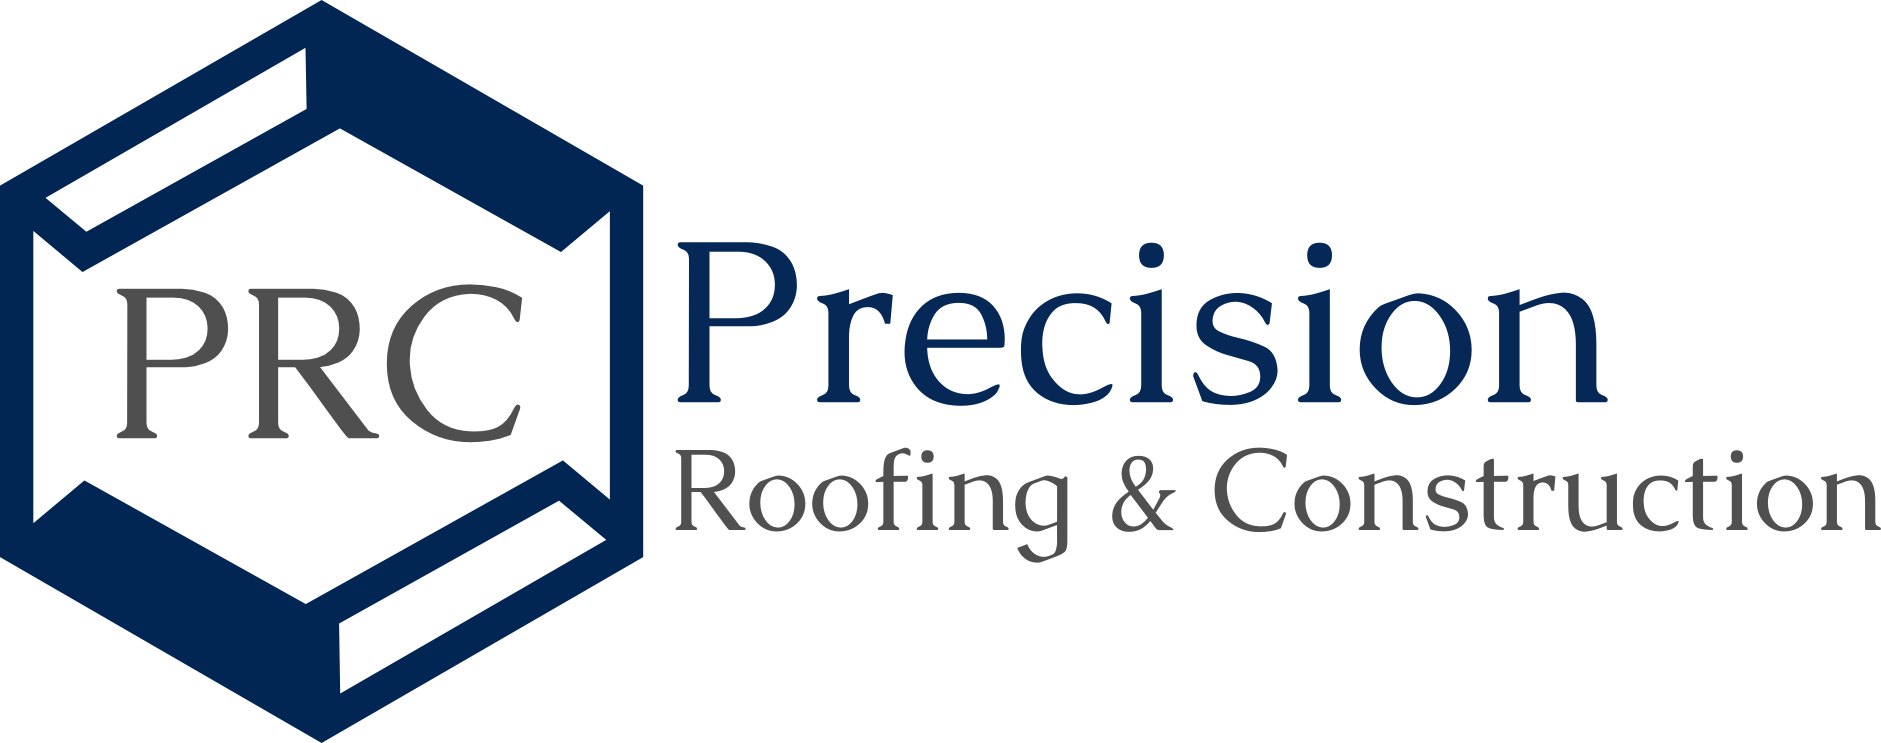 Precision Roofing & Construction Logo